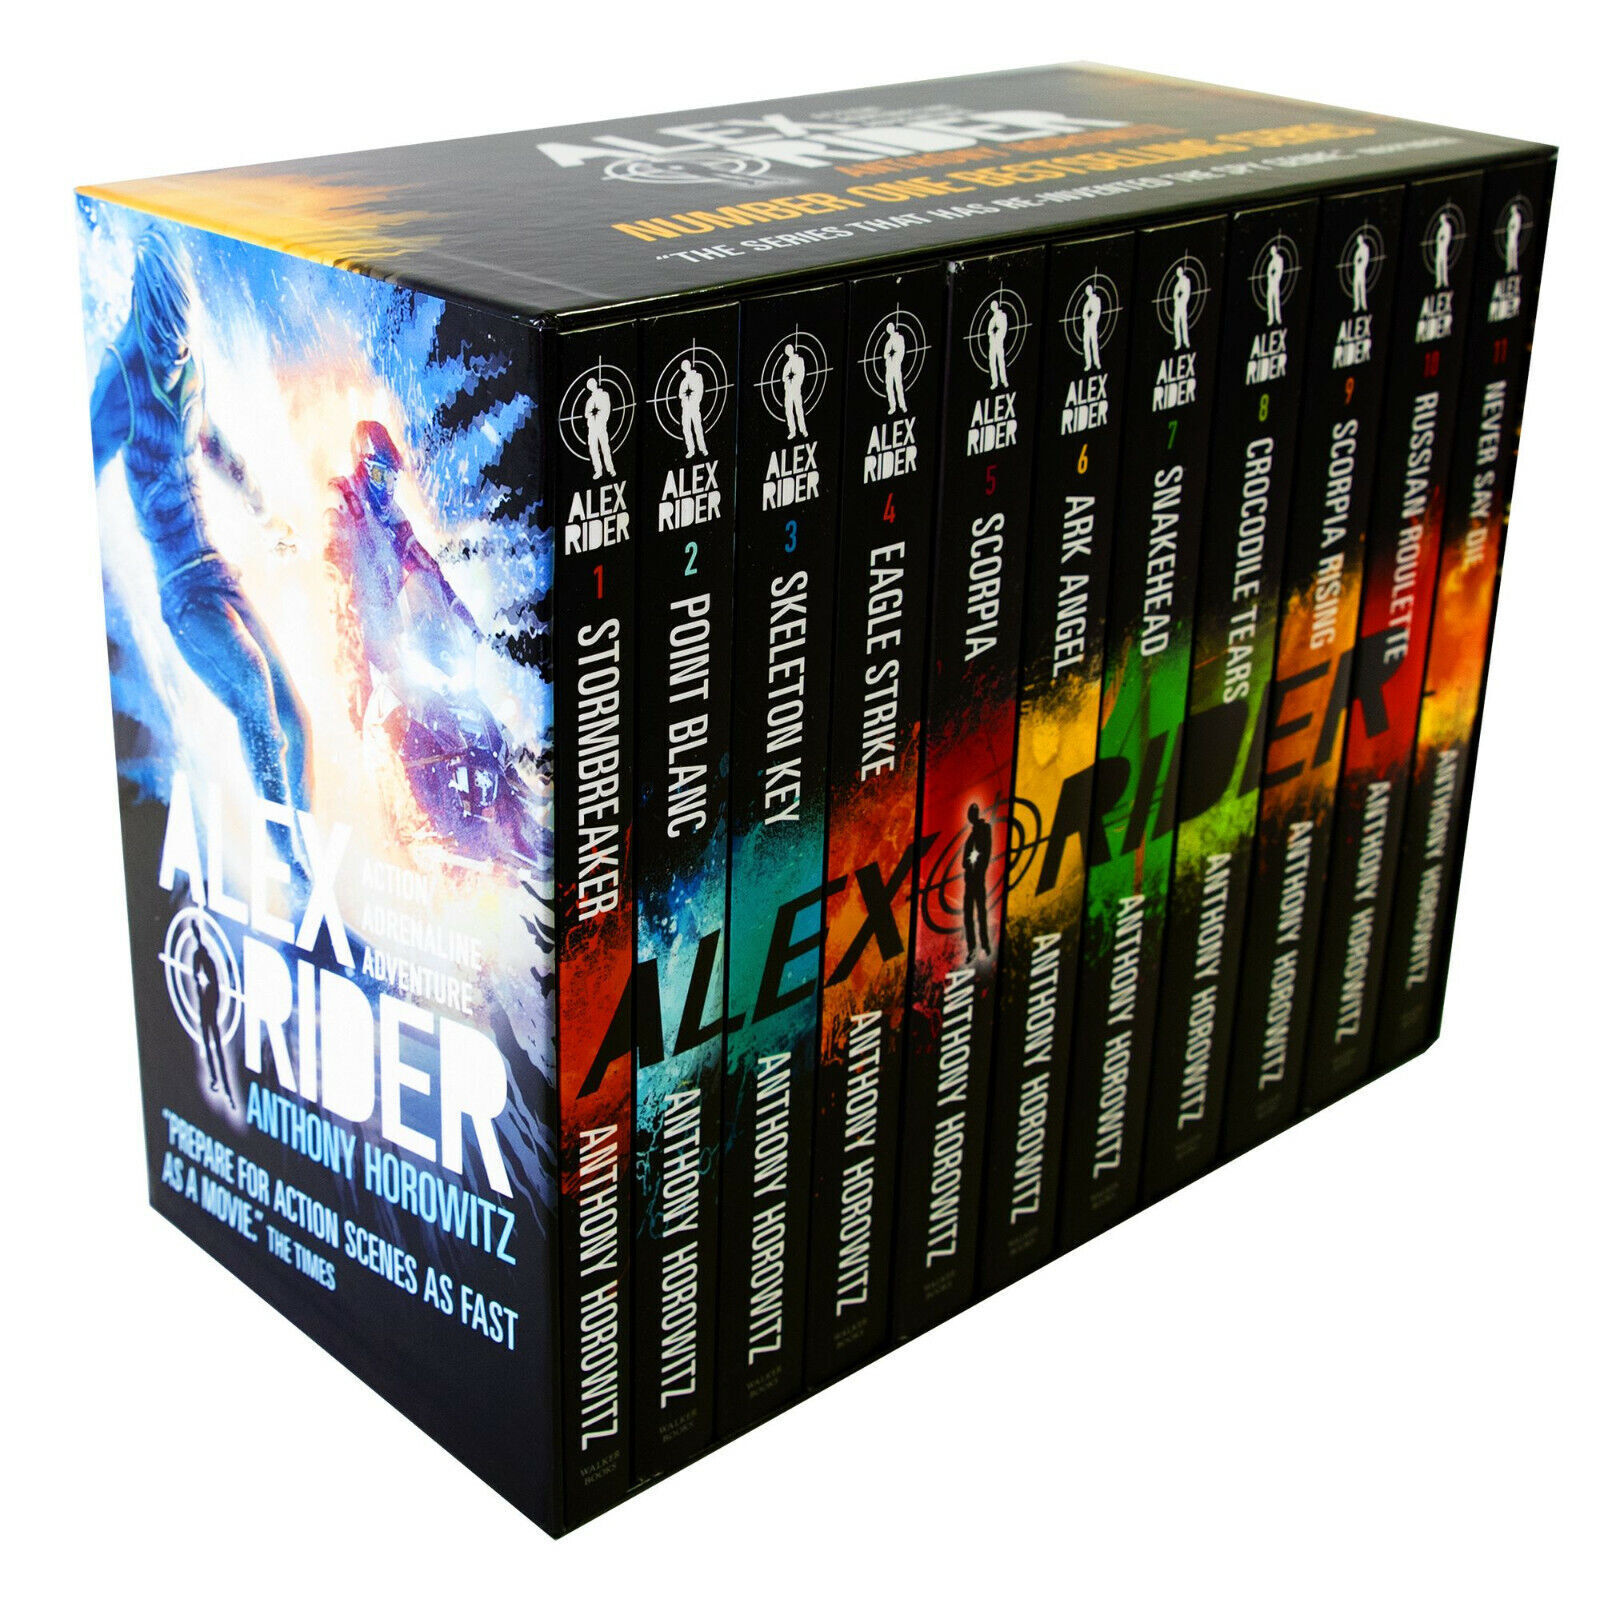 Alex Rider The Complete Missions 11 Books by Anthony Horowitz - Ages 9-14 - PB